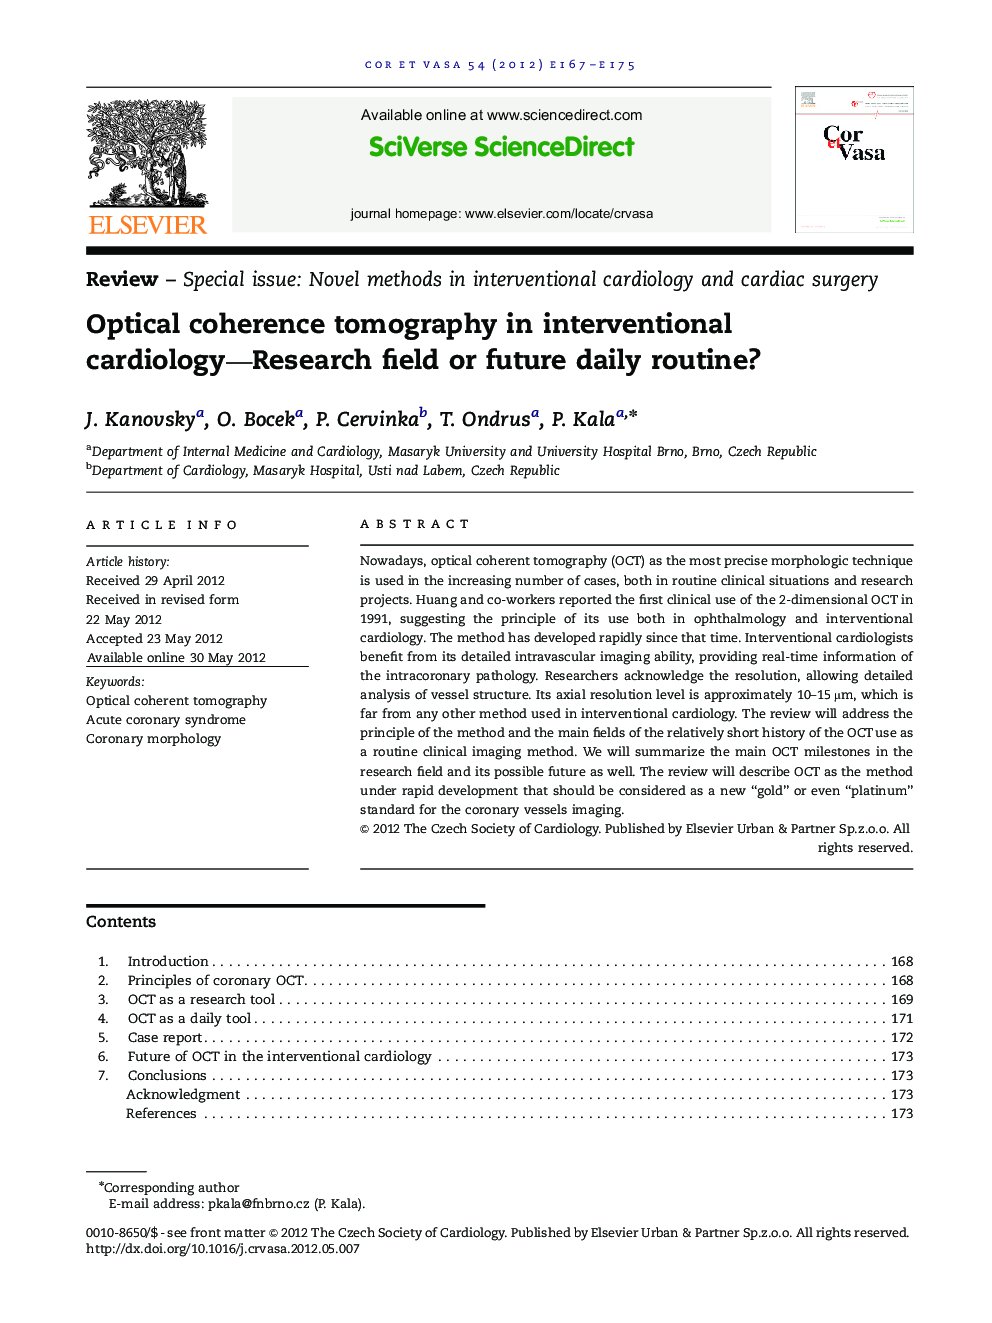 Optical coherence tomography in interventional cardiology—Research field or future daily routine?